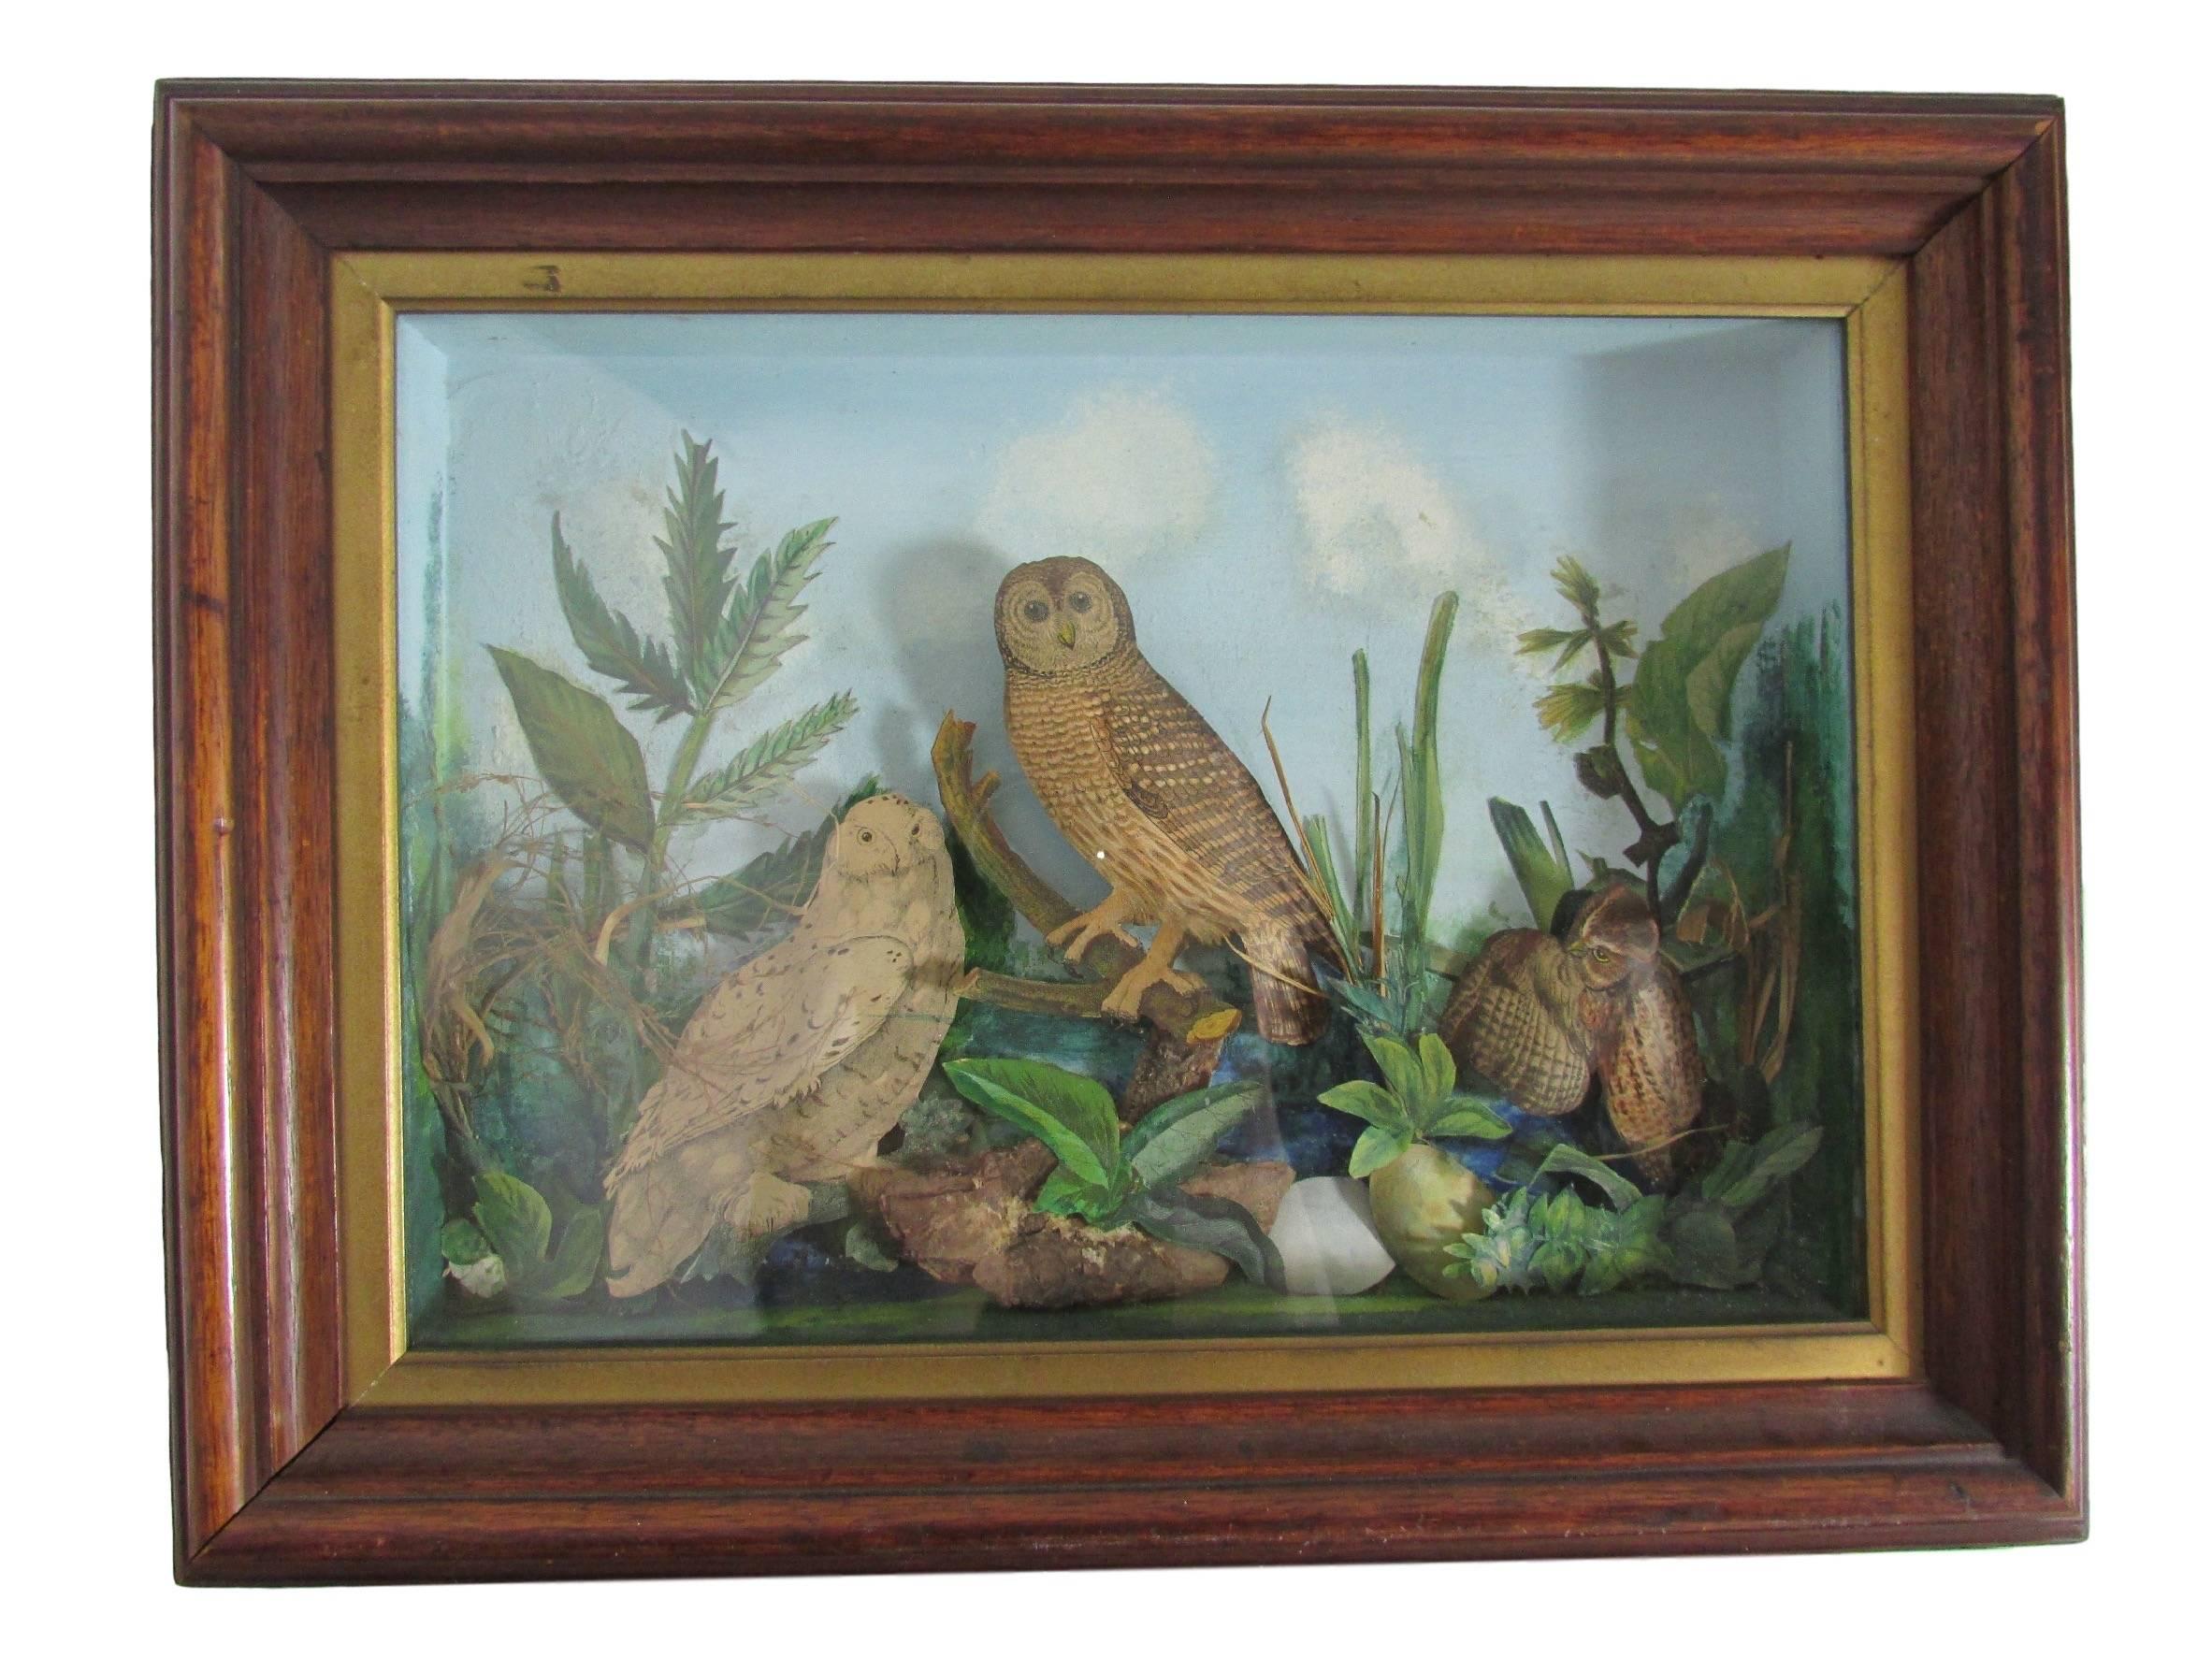 This is a fantastic pair of Victorian era owl dioramas in shadow boxes.  Creatively assembled with natural elements, decoupaged lithograph clippings, and hand painted backgrounds.